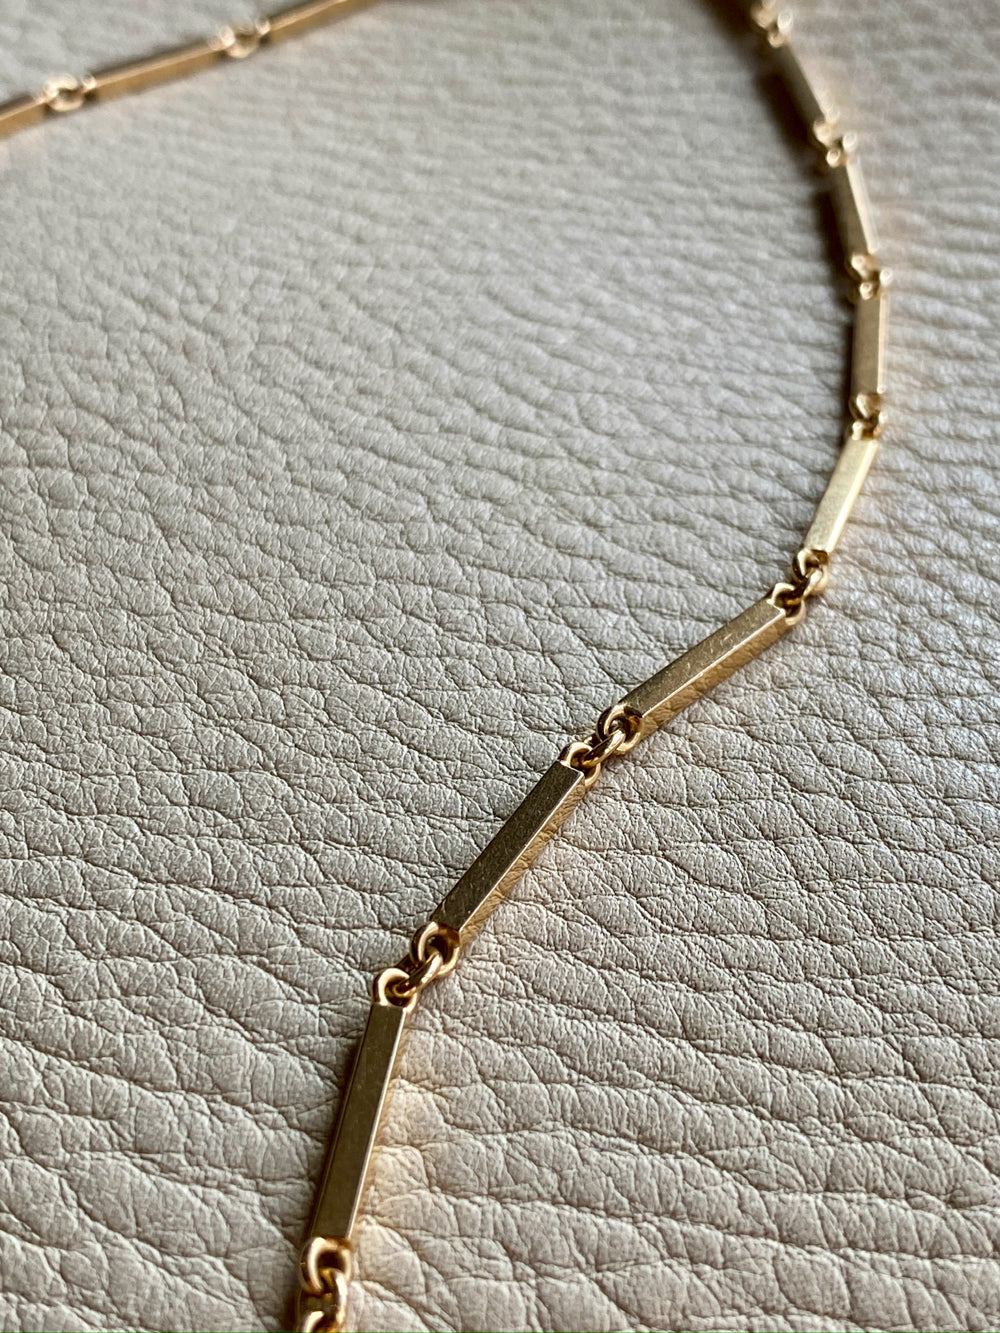 Modernist 18k solid gold bar link chain necklace - Made in 1961 - 17.5 inch length